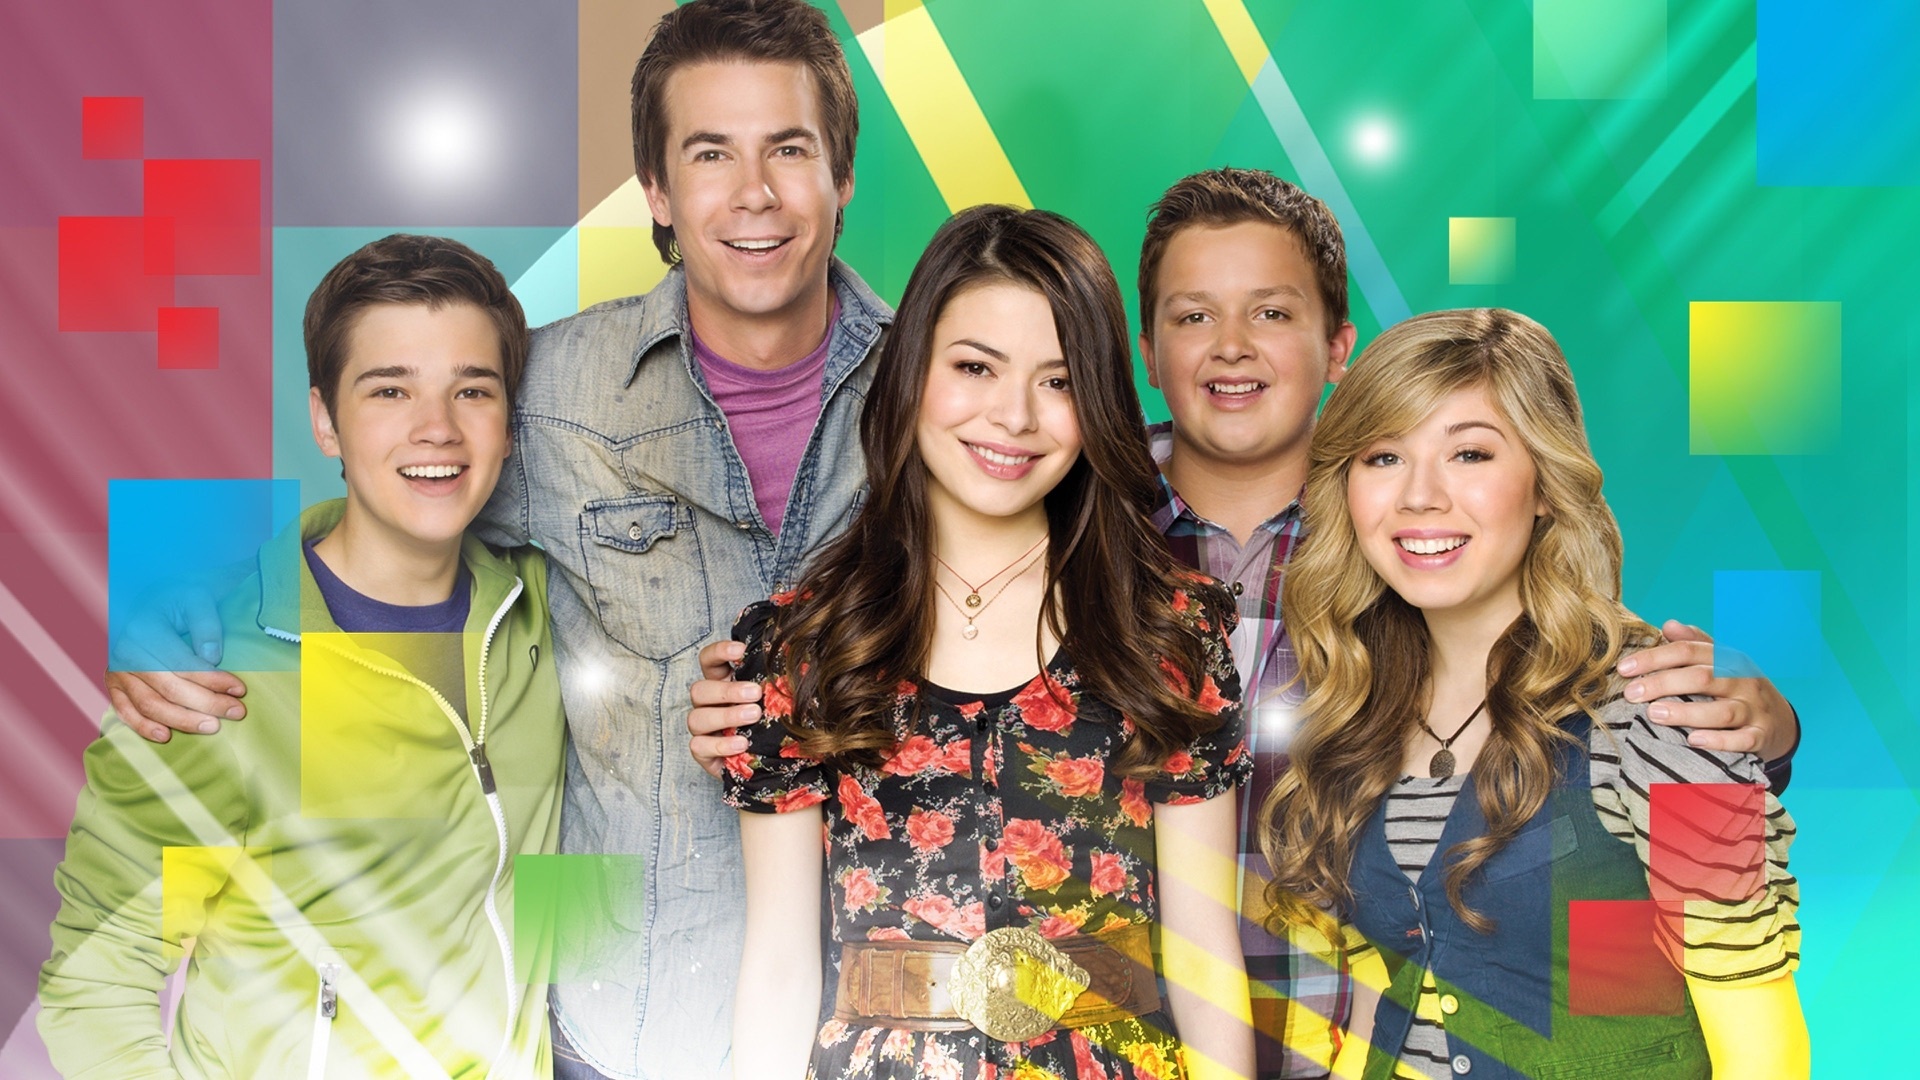 iCarly TV show, Fanart gallery, Artistic expressions, 1920x1080 Full HD Desktop